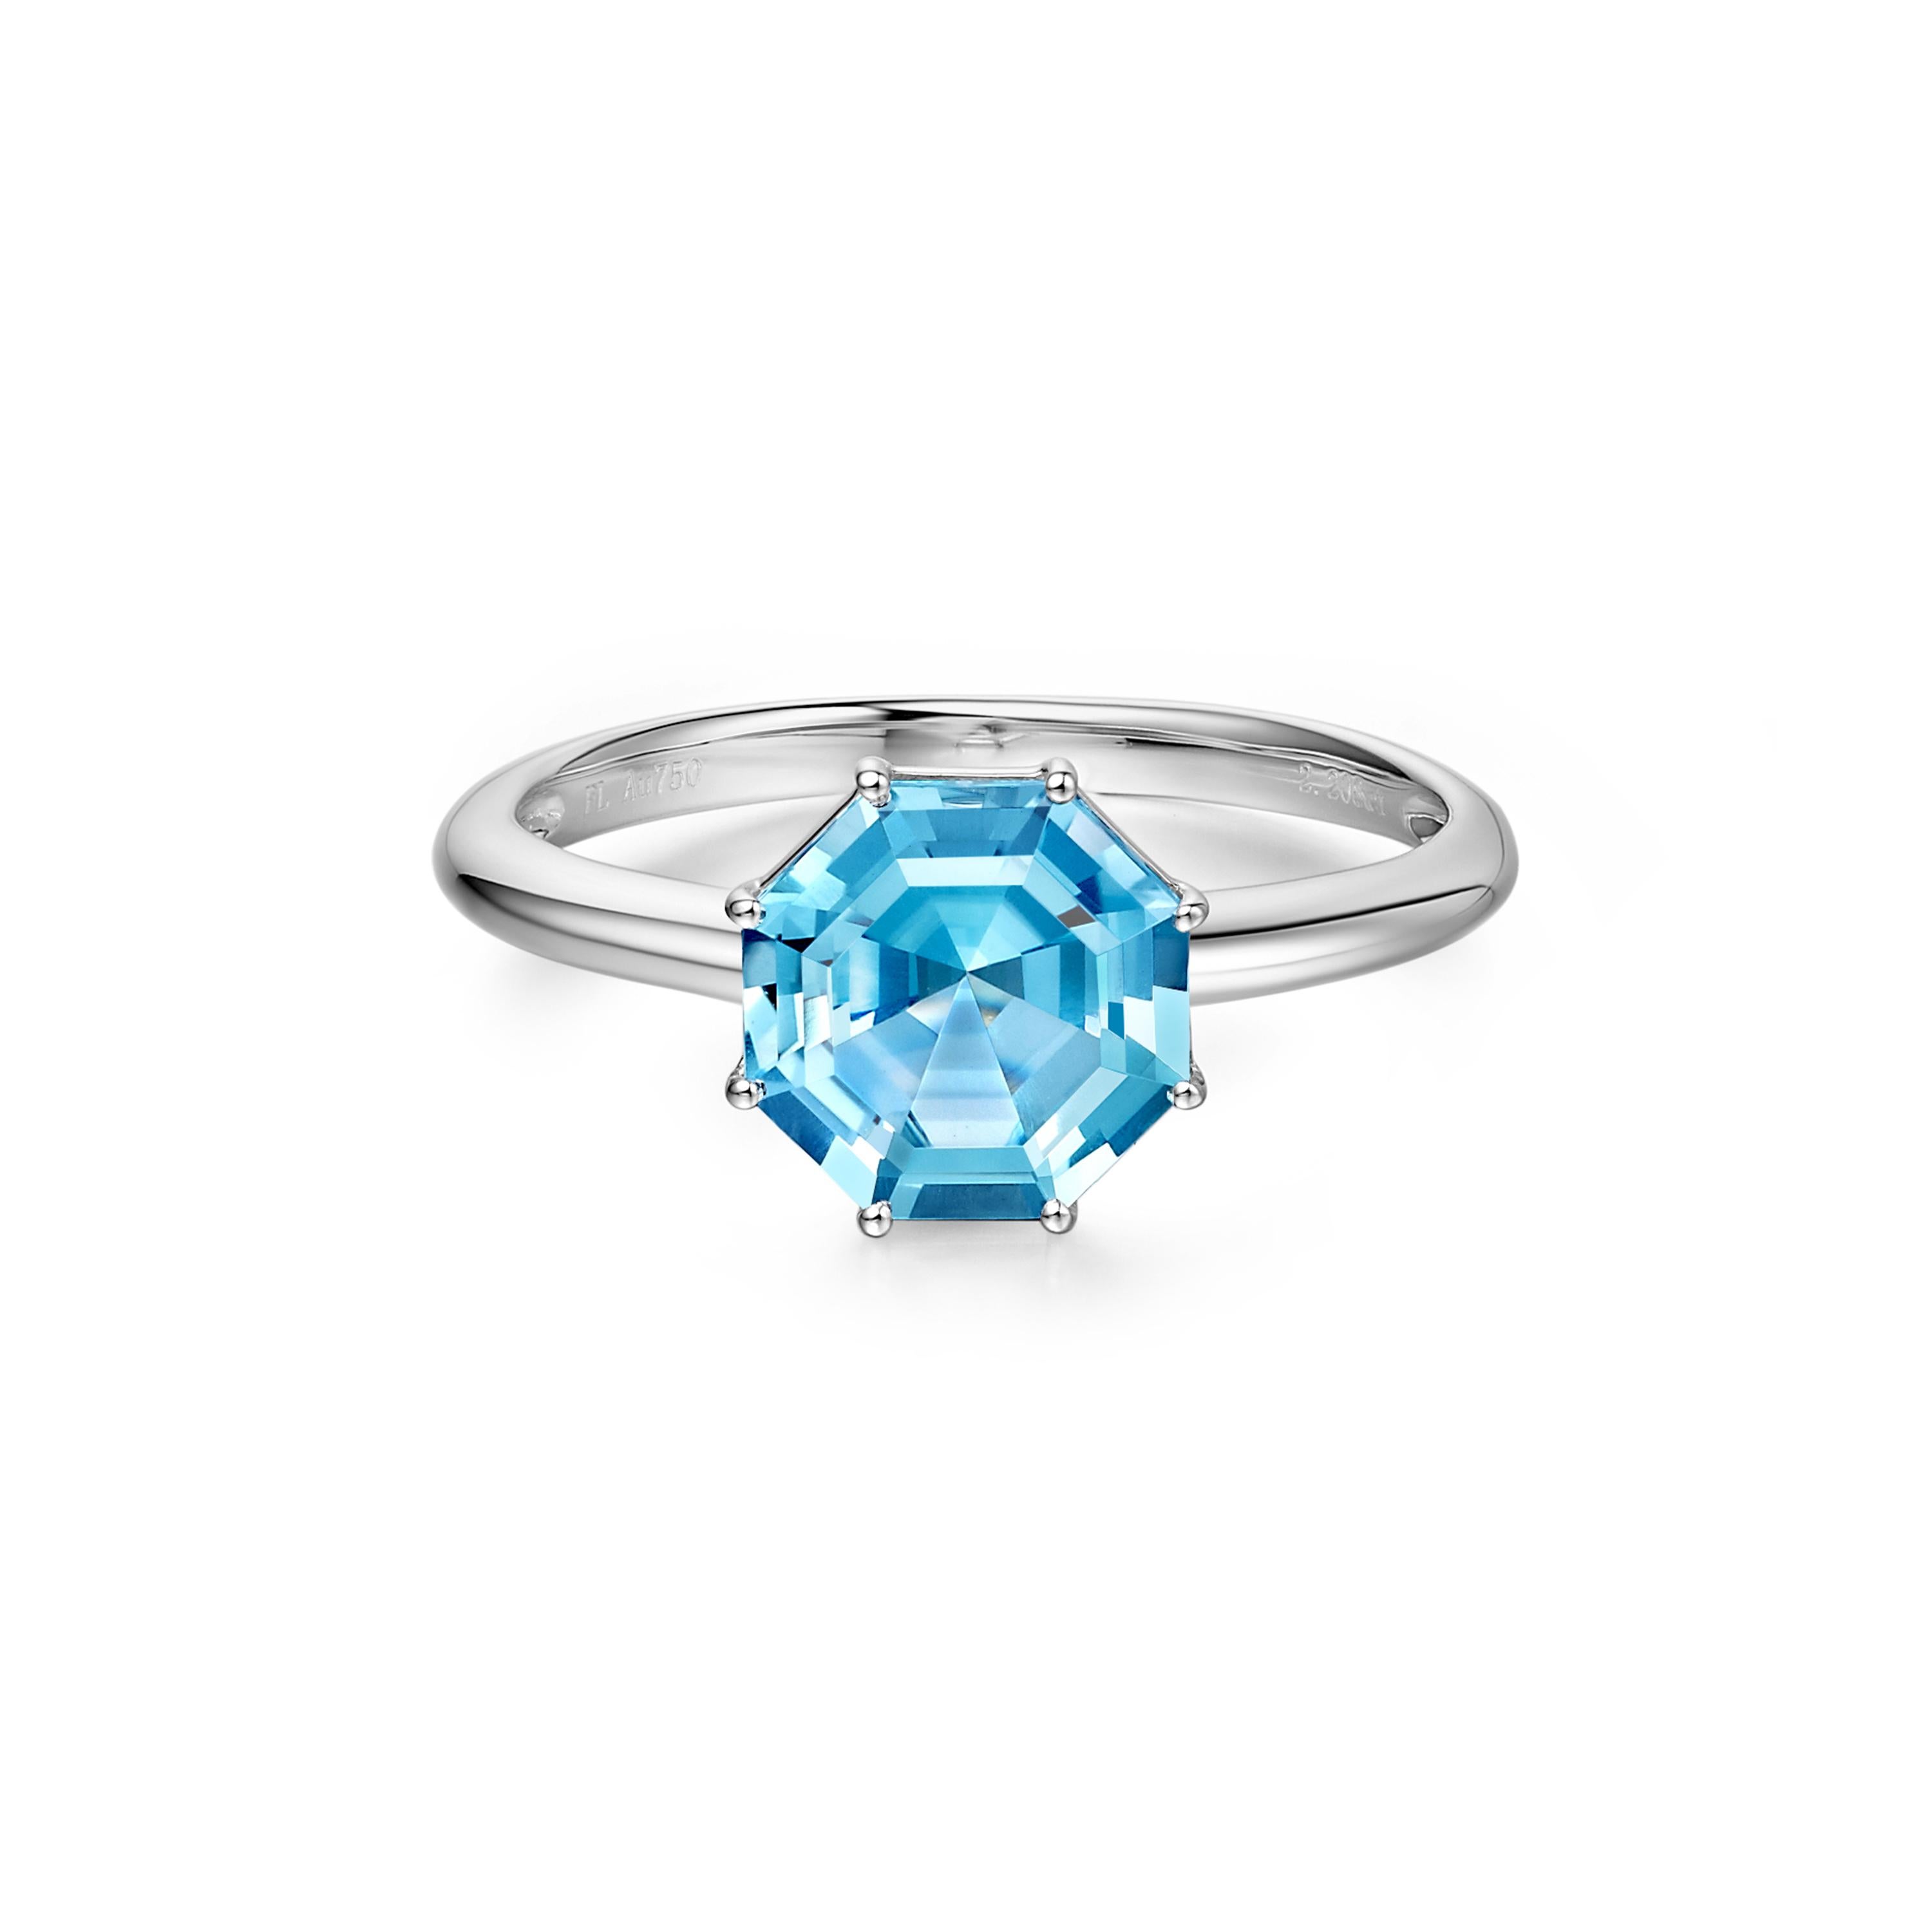 Description:
Victoriana small octagon cut ring with 2.23ct blue topaz set in 18ct white gold.

Ring sizes available: M (UK) / 6+1/4 (US) 

Inspiration:
A deluxe 18ct gold collection inspired by Victorian design. Fei Liu’s Victoriana collection